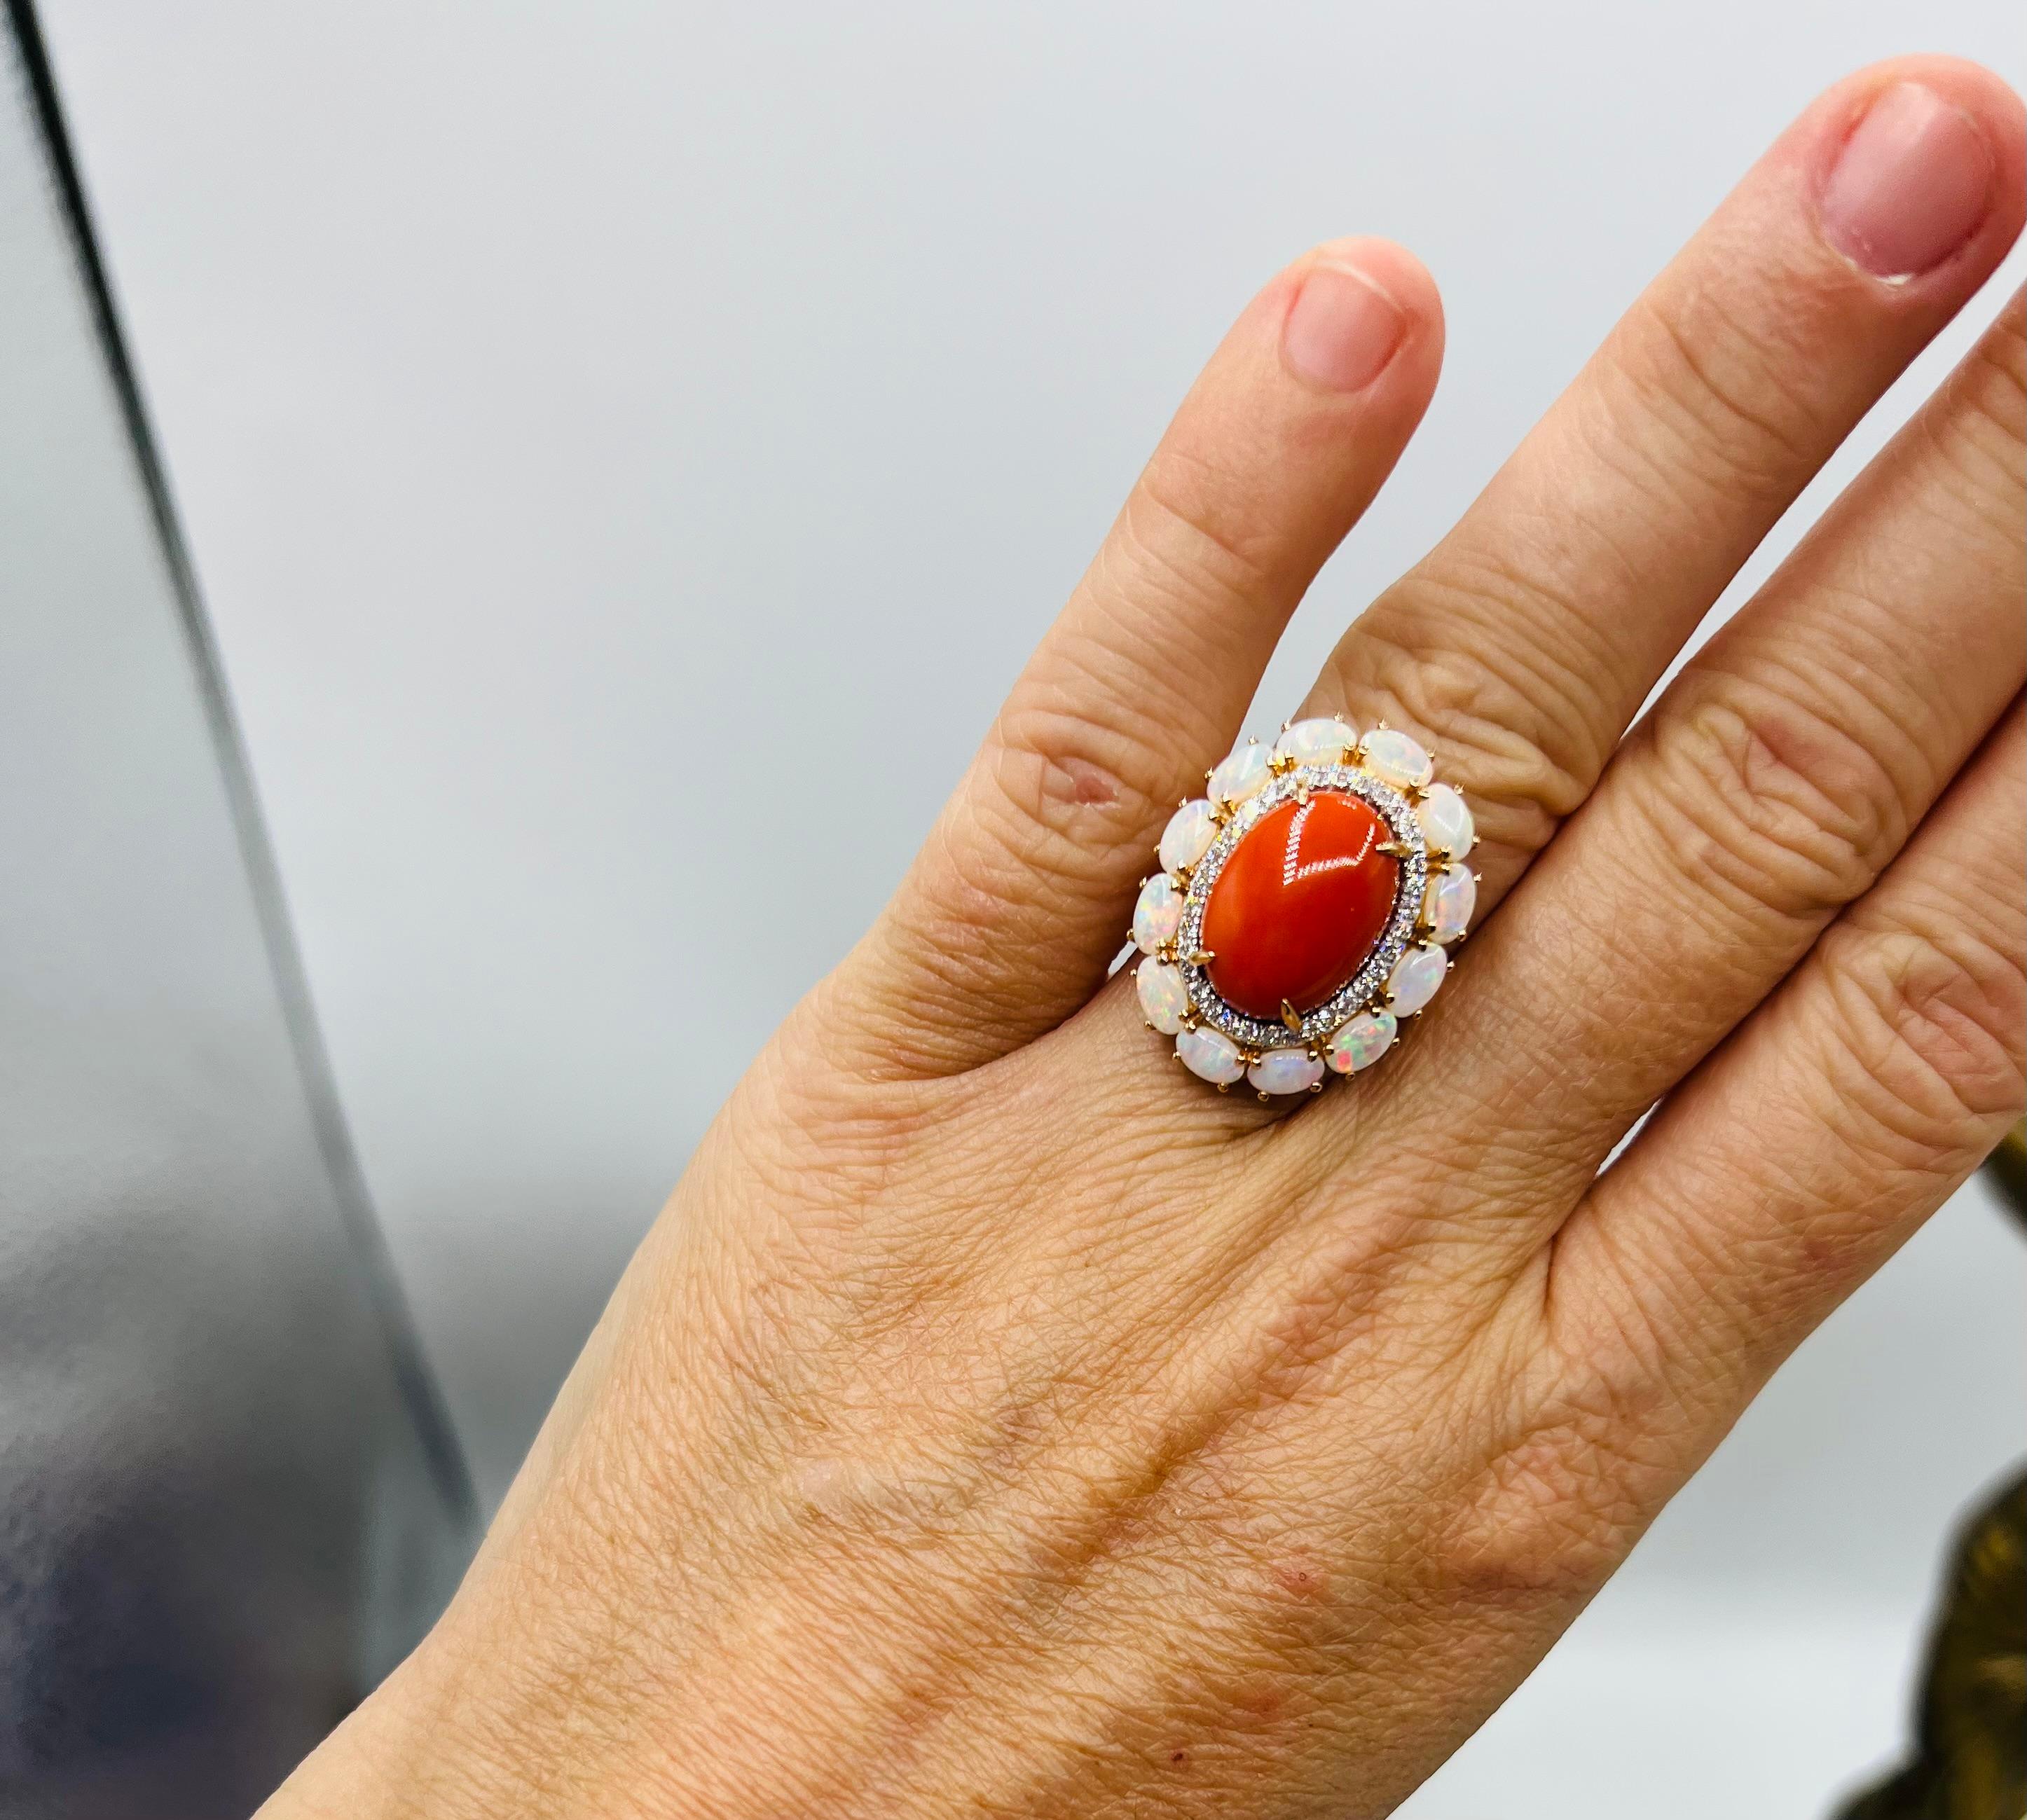 Superb 18-carat yellow gold ring set in its center a magnificent oval coral cabochon of beautiful uniform orange red color

Surrounded by brilliants in paving for about 0.30 carat in full,

Also surrounded by oval cabochon opals

Total weight: 8.98